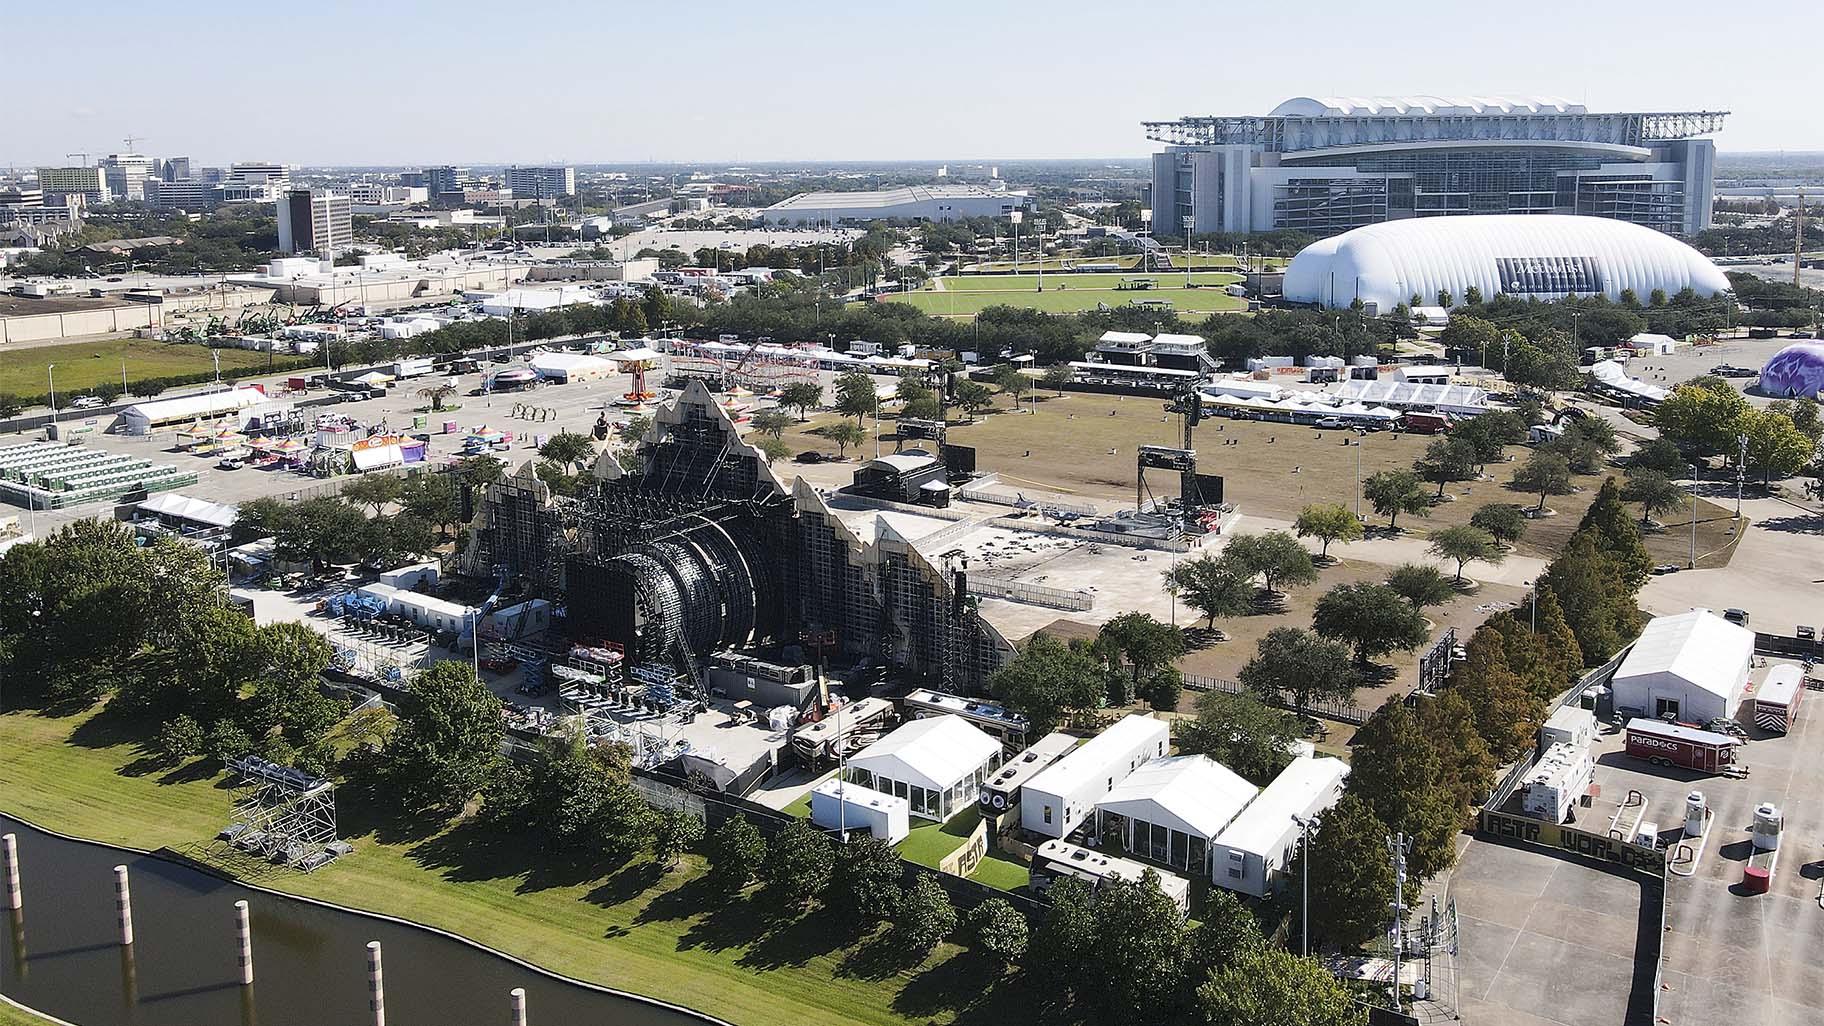 The drone image shows the Astroworld stage area on Saturday, November 6, 2021 in Houston. Several people were killed and many others were injured when authorities explained that the audience had surged at the festival while Travis Scott was playing on Friday night. (Elizabeth Conley / Houston Chronicle via AP)